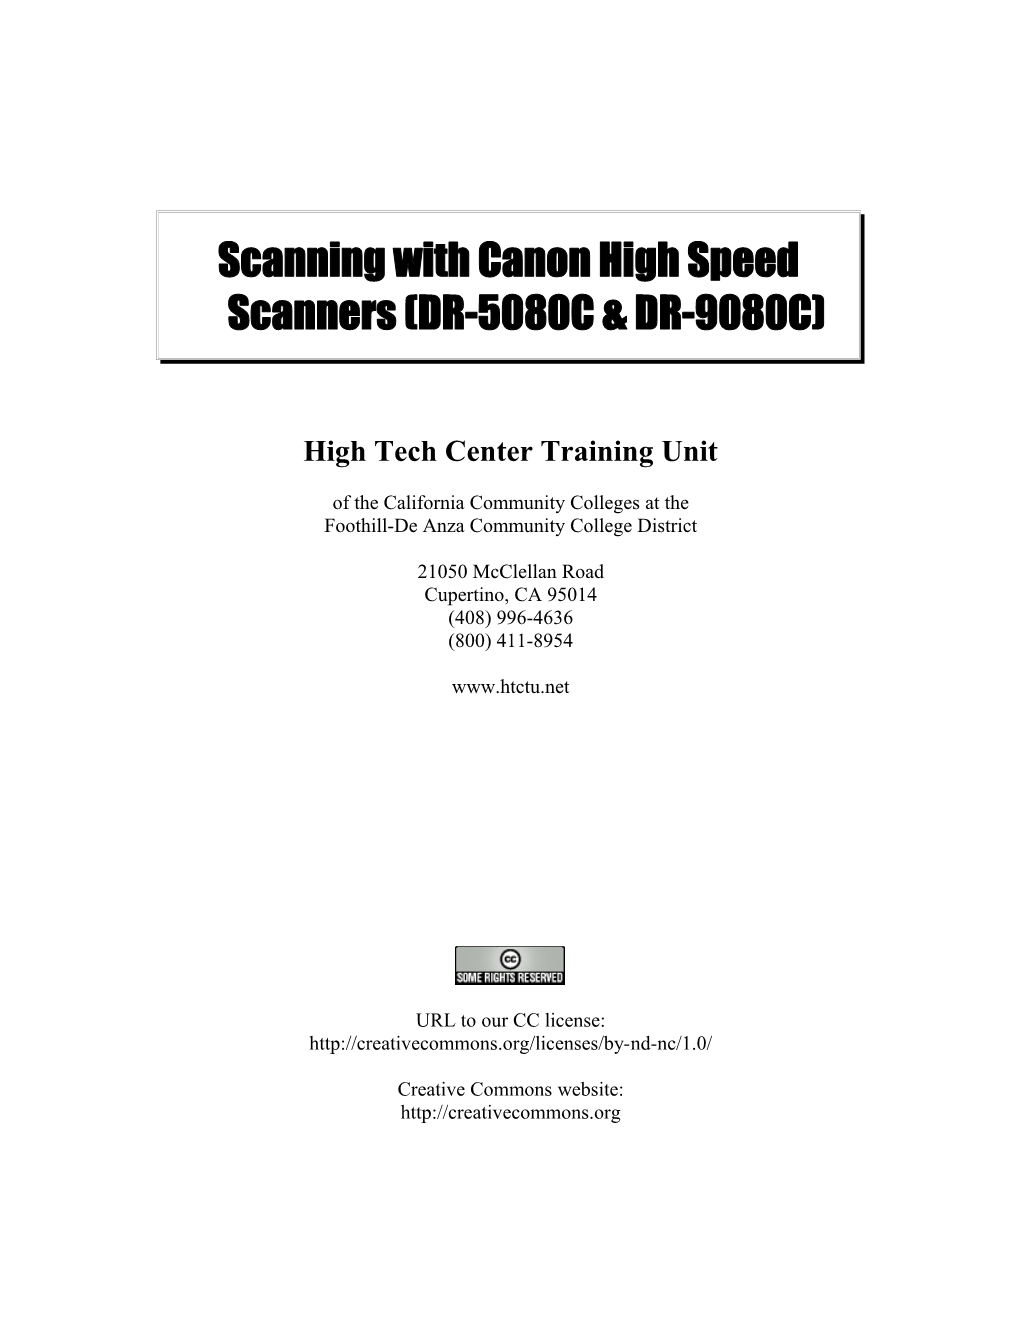 Scanning with Canon High Speed Scanners (DR-5080C & DR-9080C)